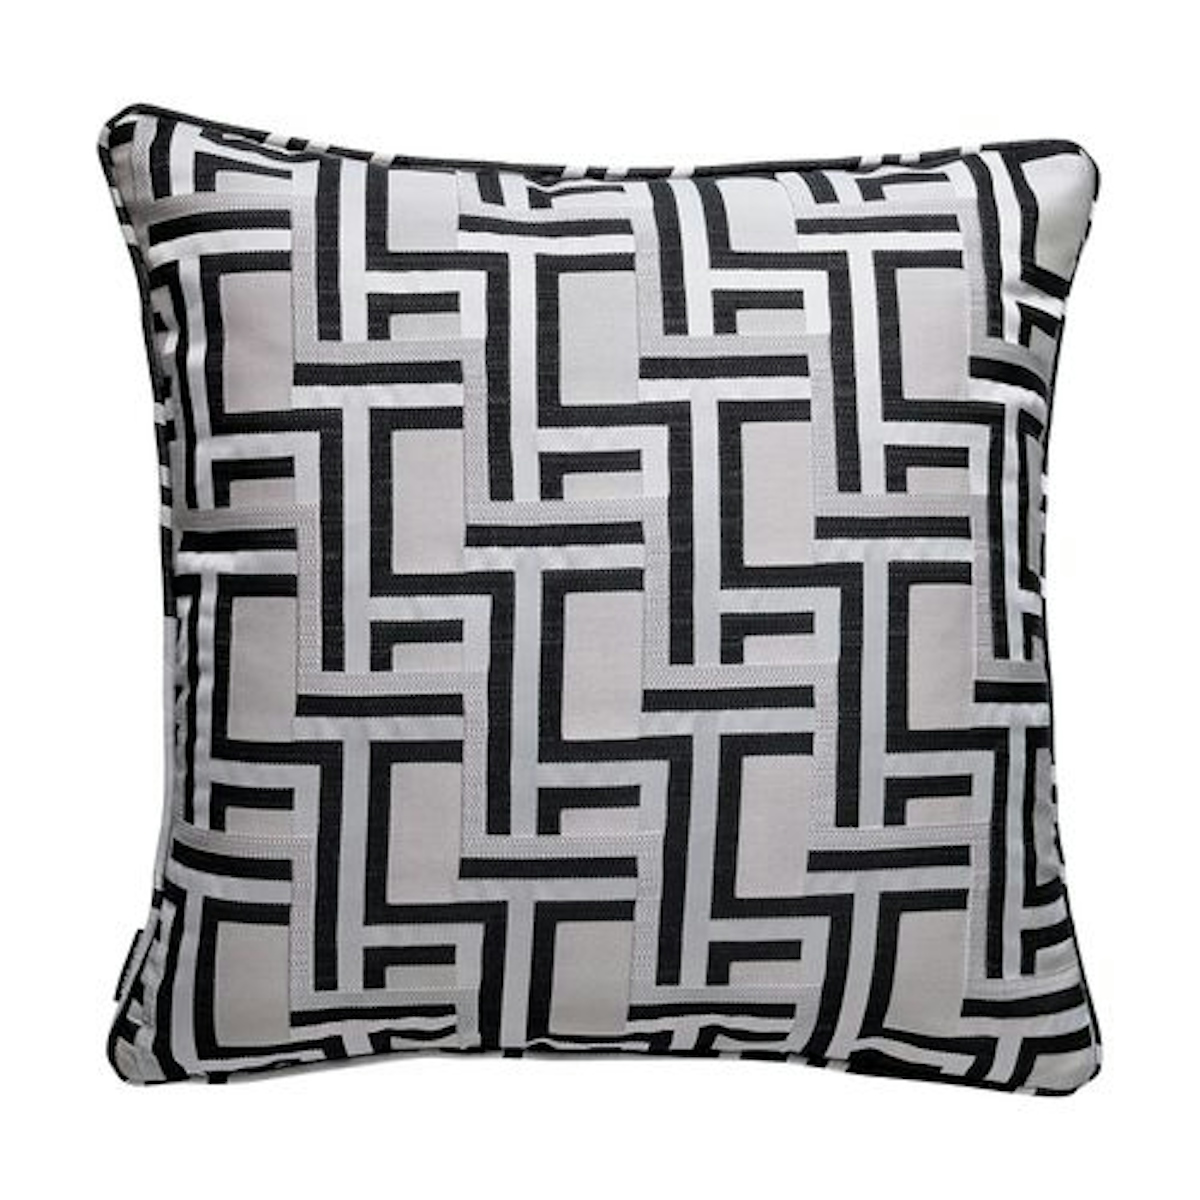 Forbes Cushion - 9 Best Luxury Cushions to Buy for your Home - Style Guide - LuxDeco.com